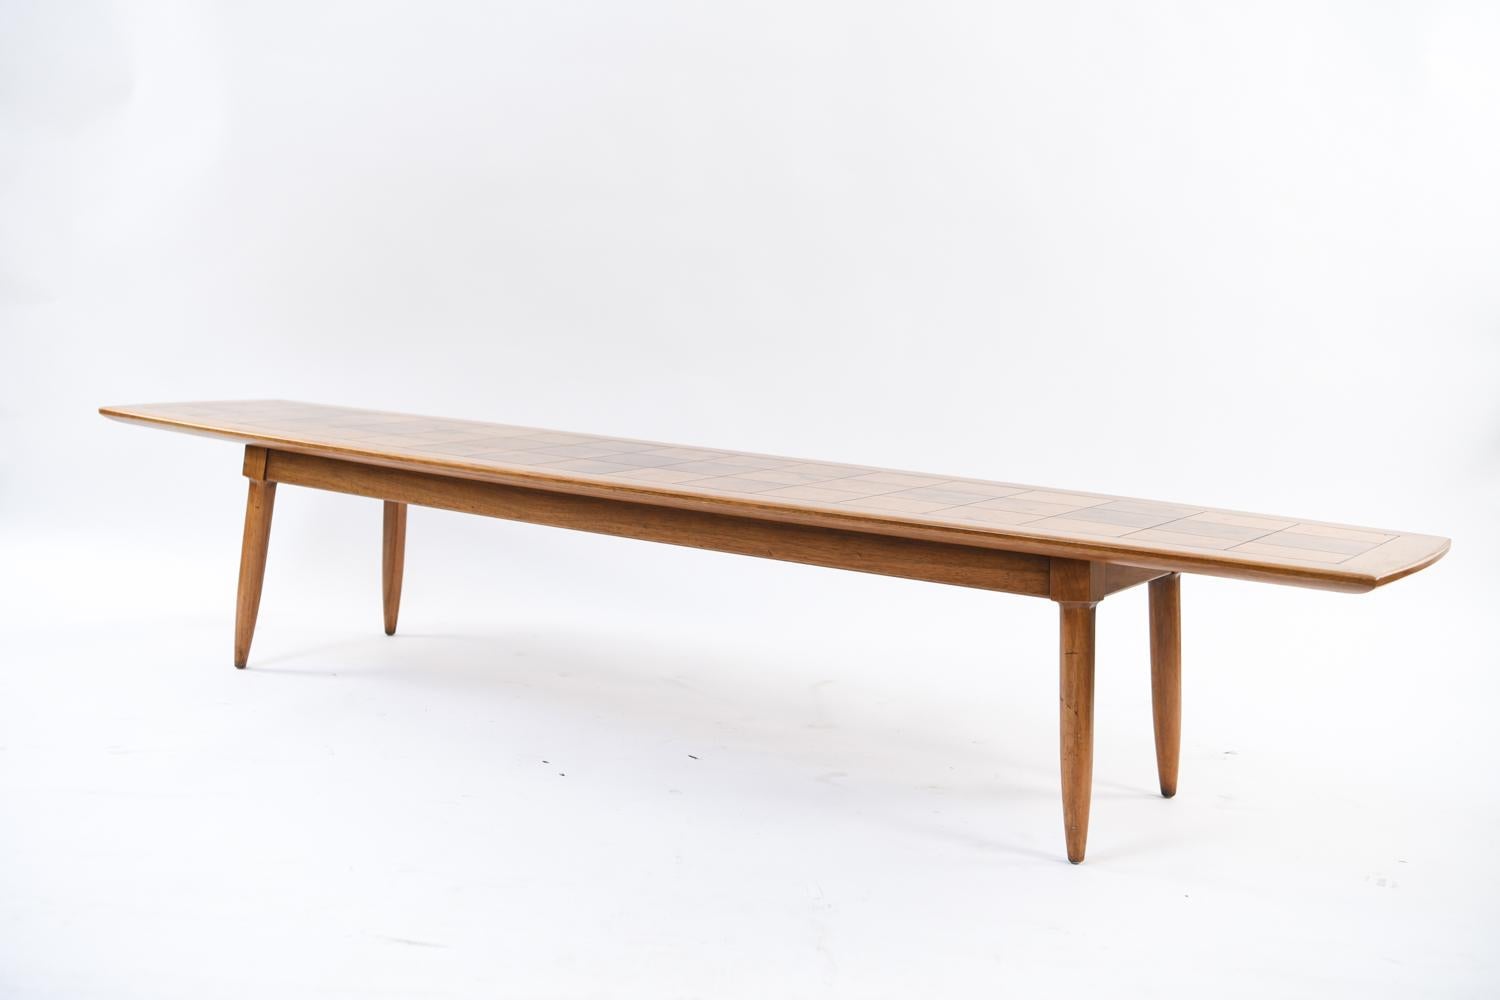 Midcentury surfboard style parquet top and oak frame coffee table by Tomlinson.